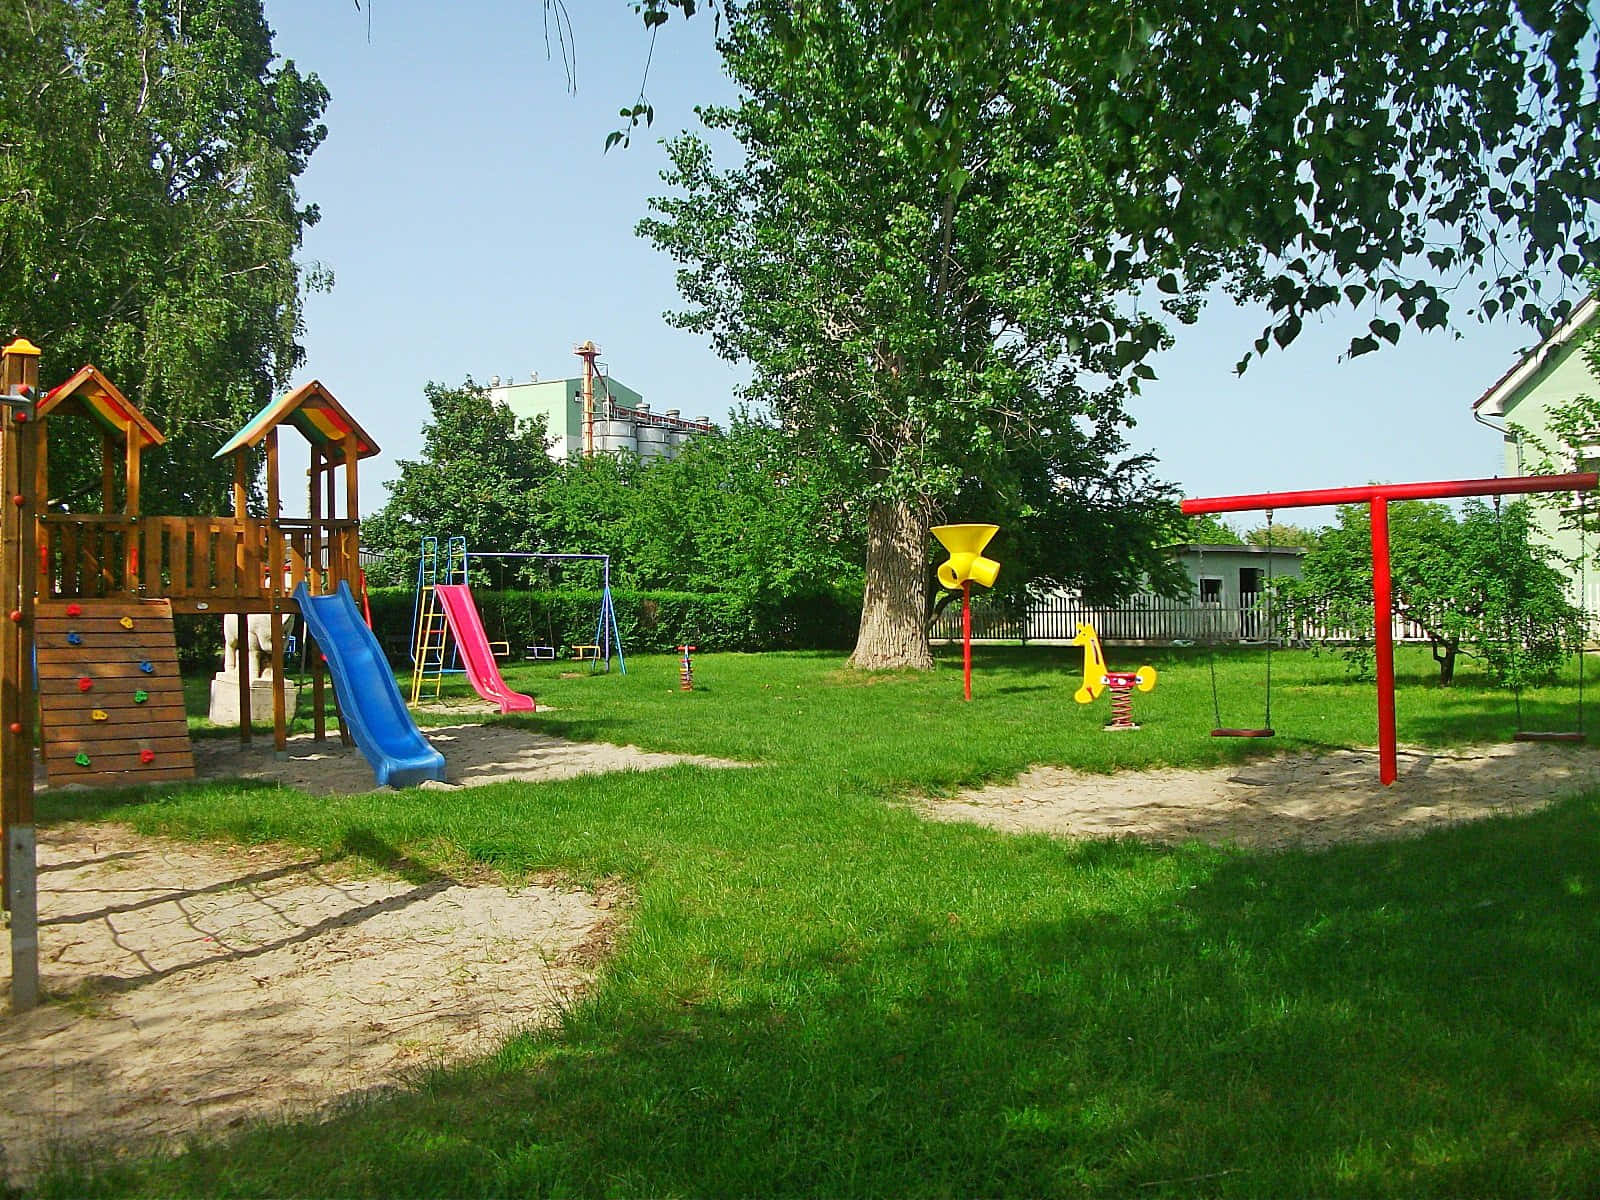 Exciting Children's Playground in a Peaceful Park